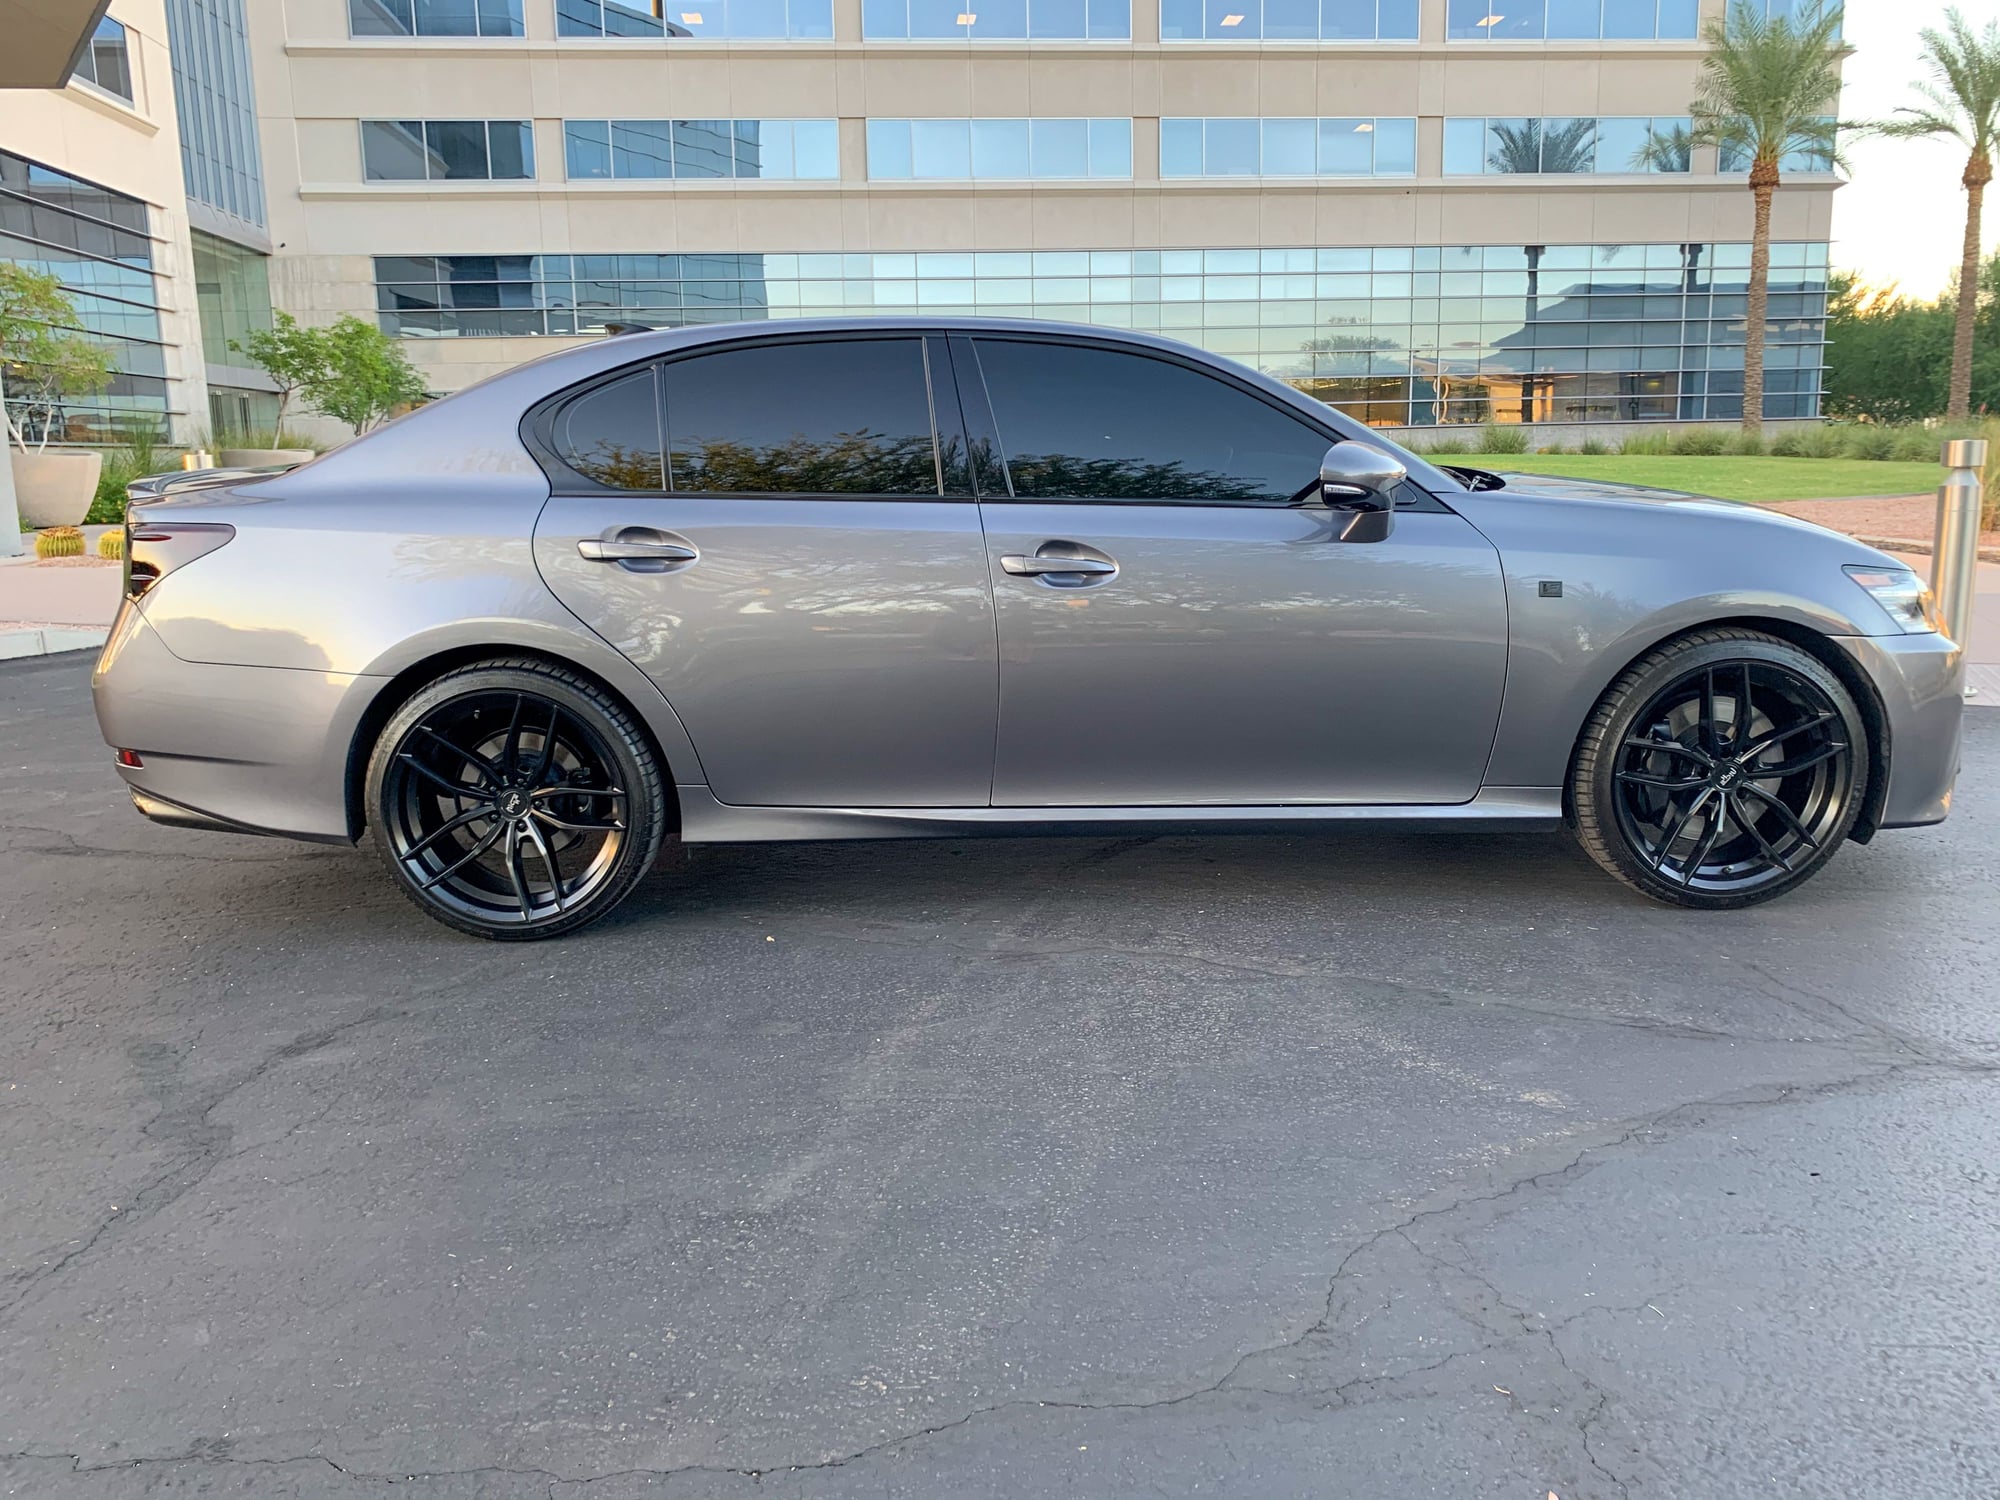 2015 Lexus GS350 - **MINT - 2015 Lexus GS350 F-Sport, Red Interior, Blackout Package** - Used - VIN JTHBE1BL5FA010905 - 43,000 Miles - 6 cyl - 2WD - Automatic - Sedan - Gray - Scottsdale, AZ 85255, United States